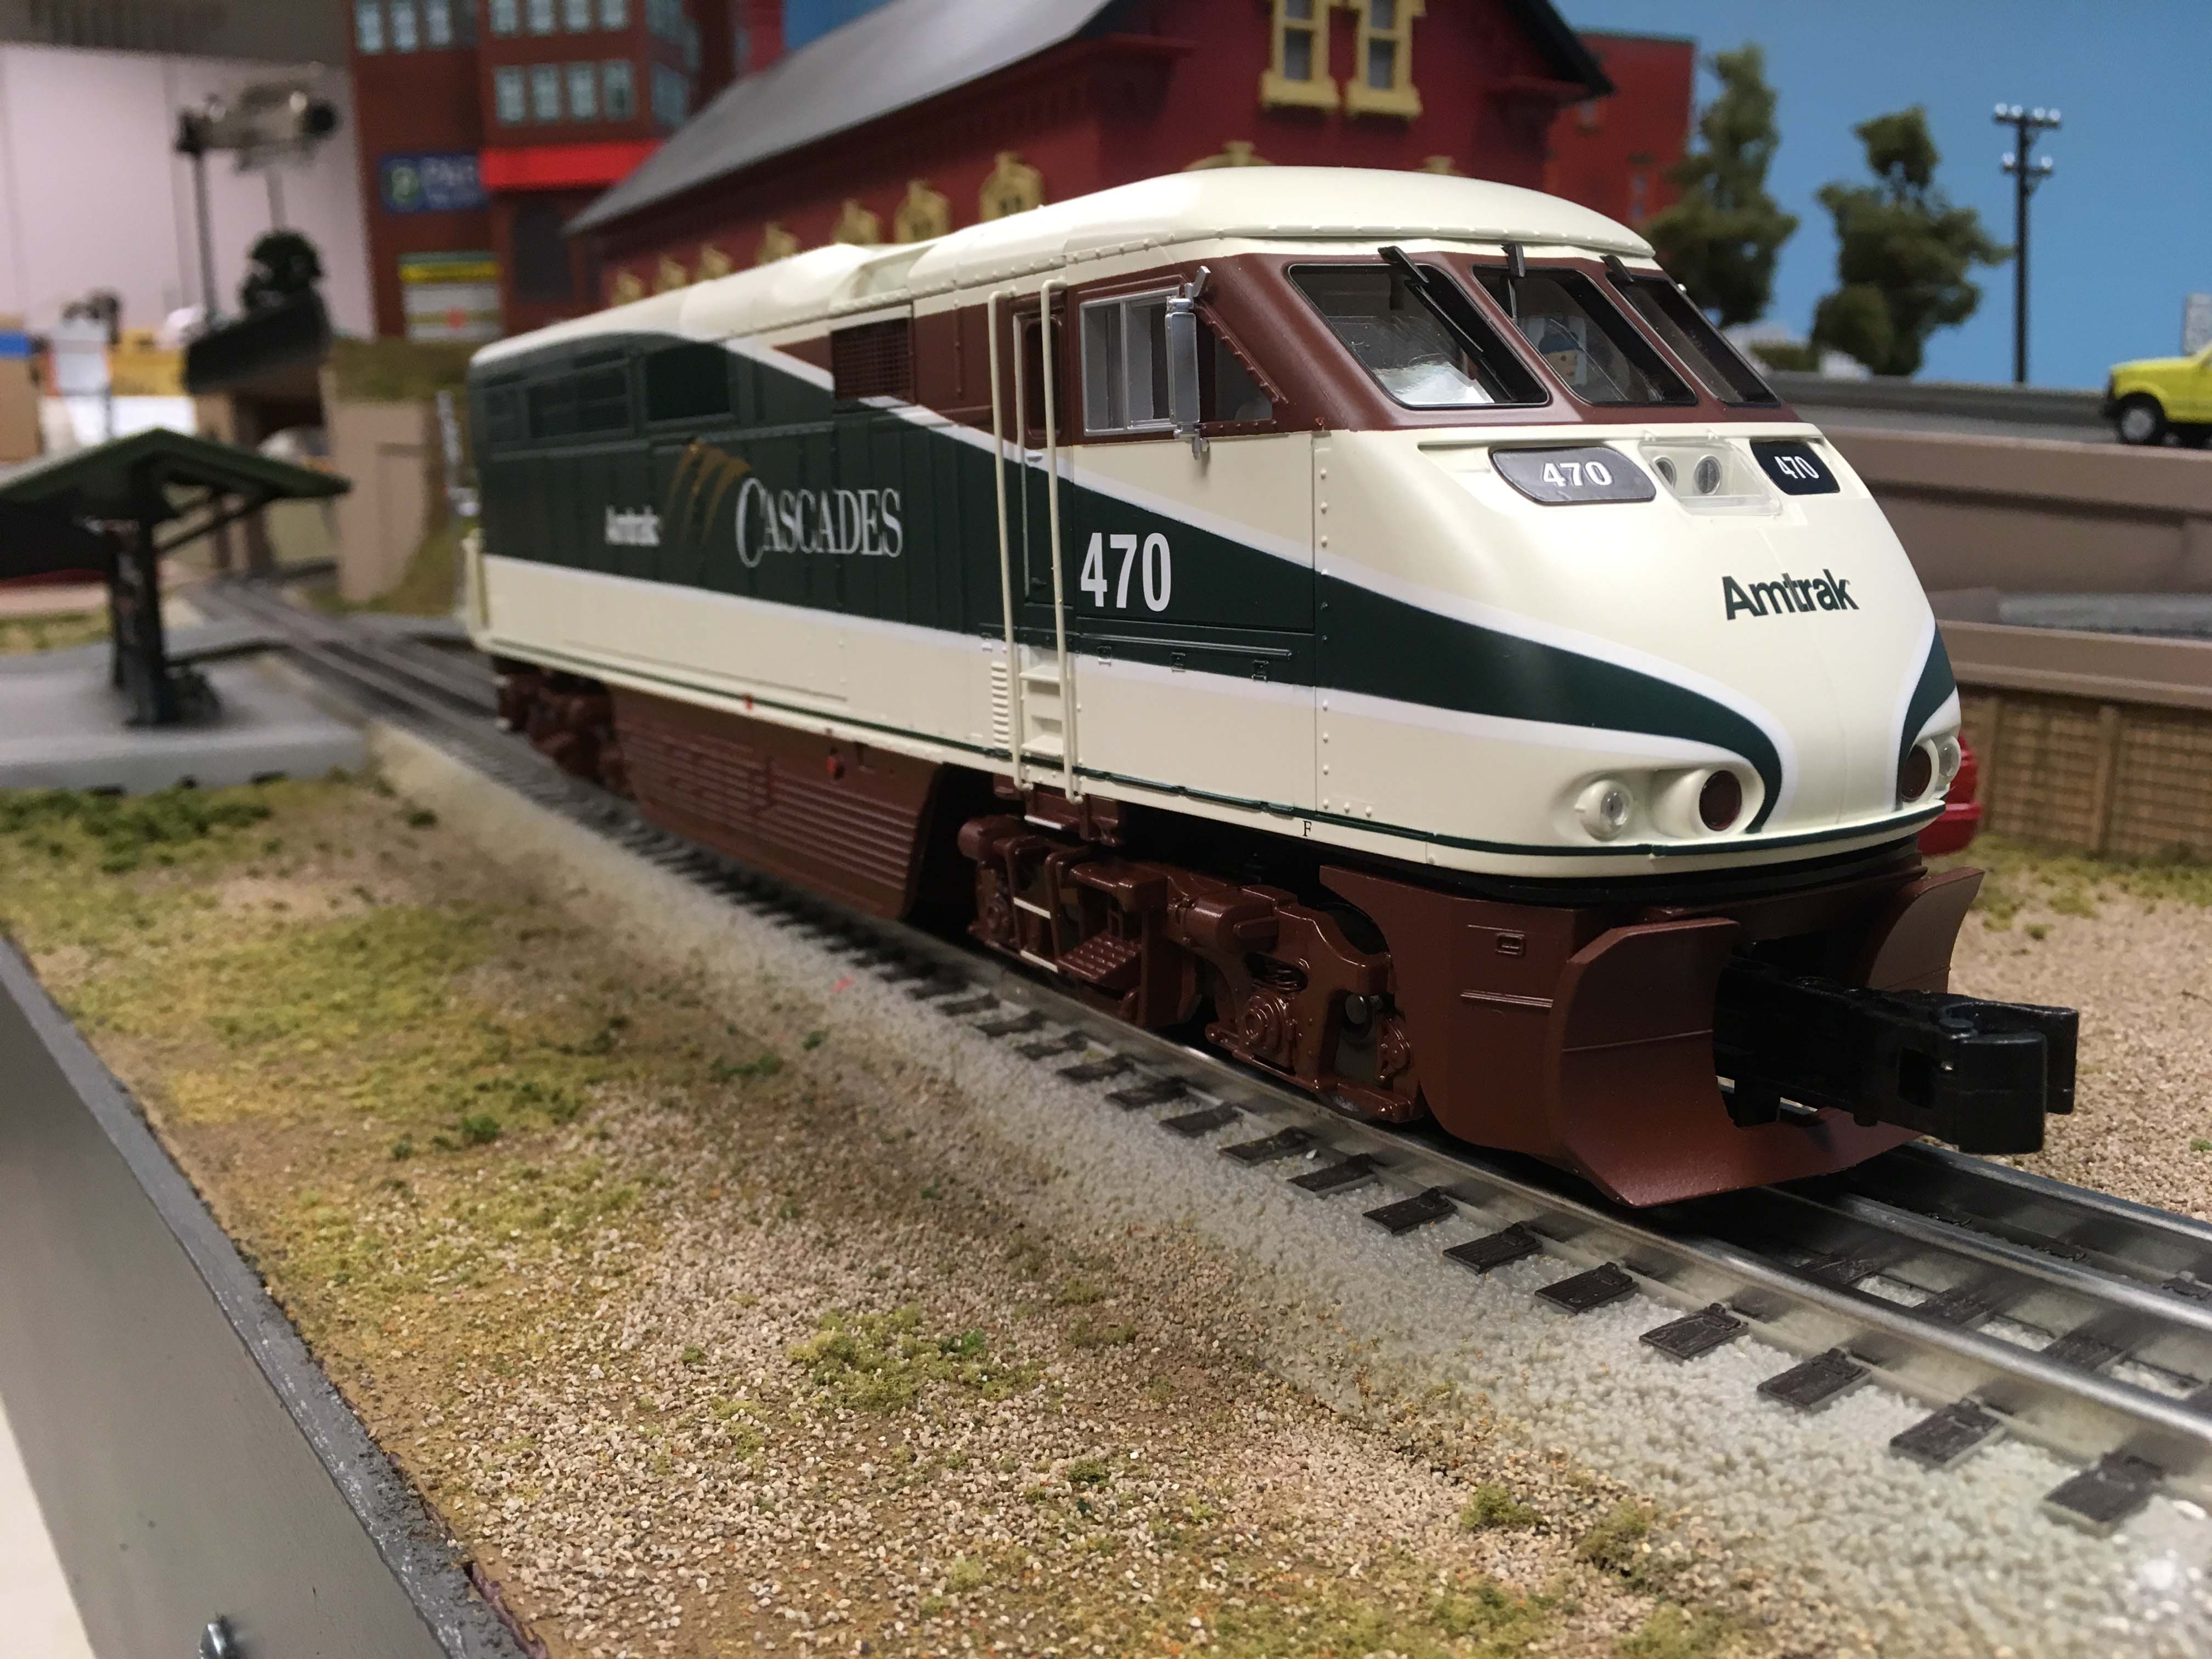 ON THE TEST TRACK: The new Williams by Bachmann Amtrak F59PHI 